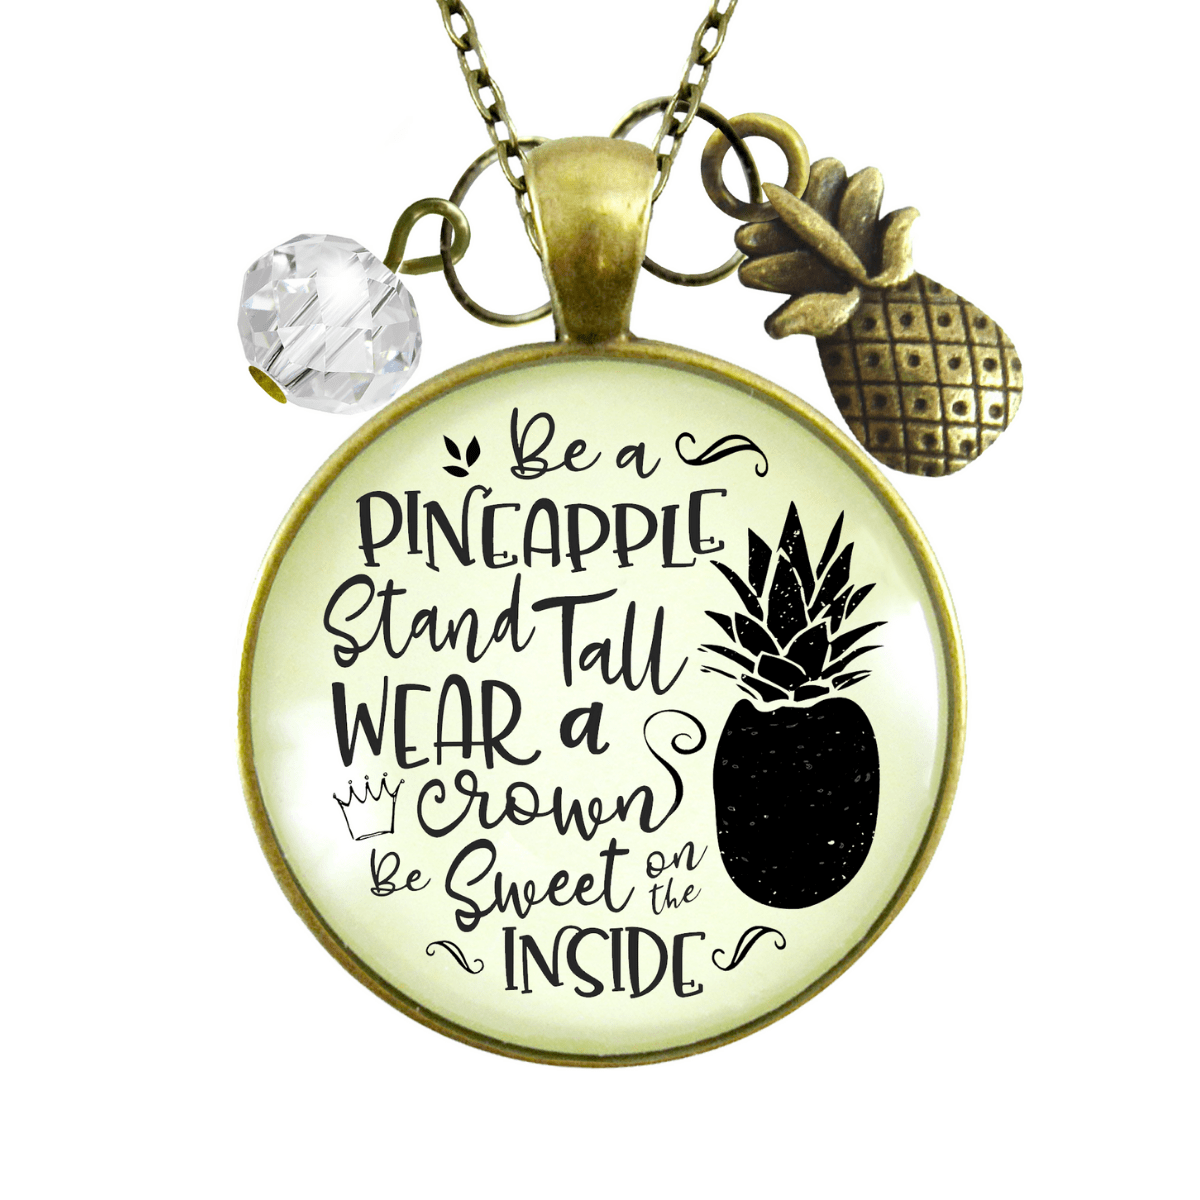 Gutsy Goodness Pineapple Necklace Stand Tall Quote Hawaiian Inspired Charm Jewelry - Gutsy Goodness Handmade Jewelry;Pineapple Necklace Stand Tall Quote Hawaiian Inspired Charm Jewelry - Gutsy Goodness Handmade Jewelry Gifts